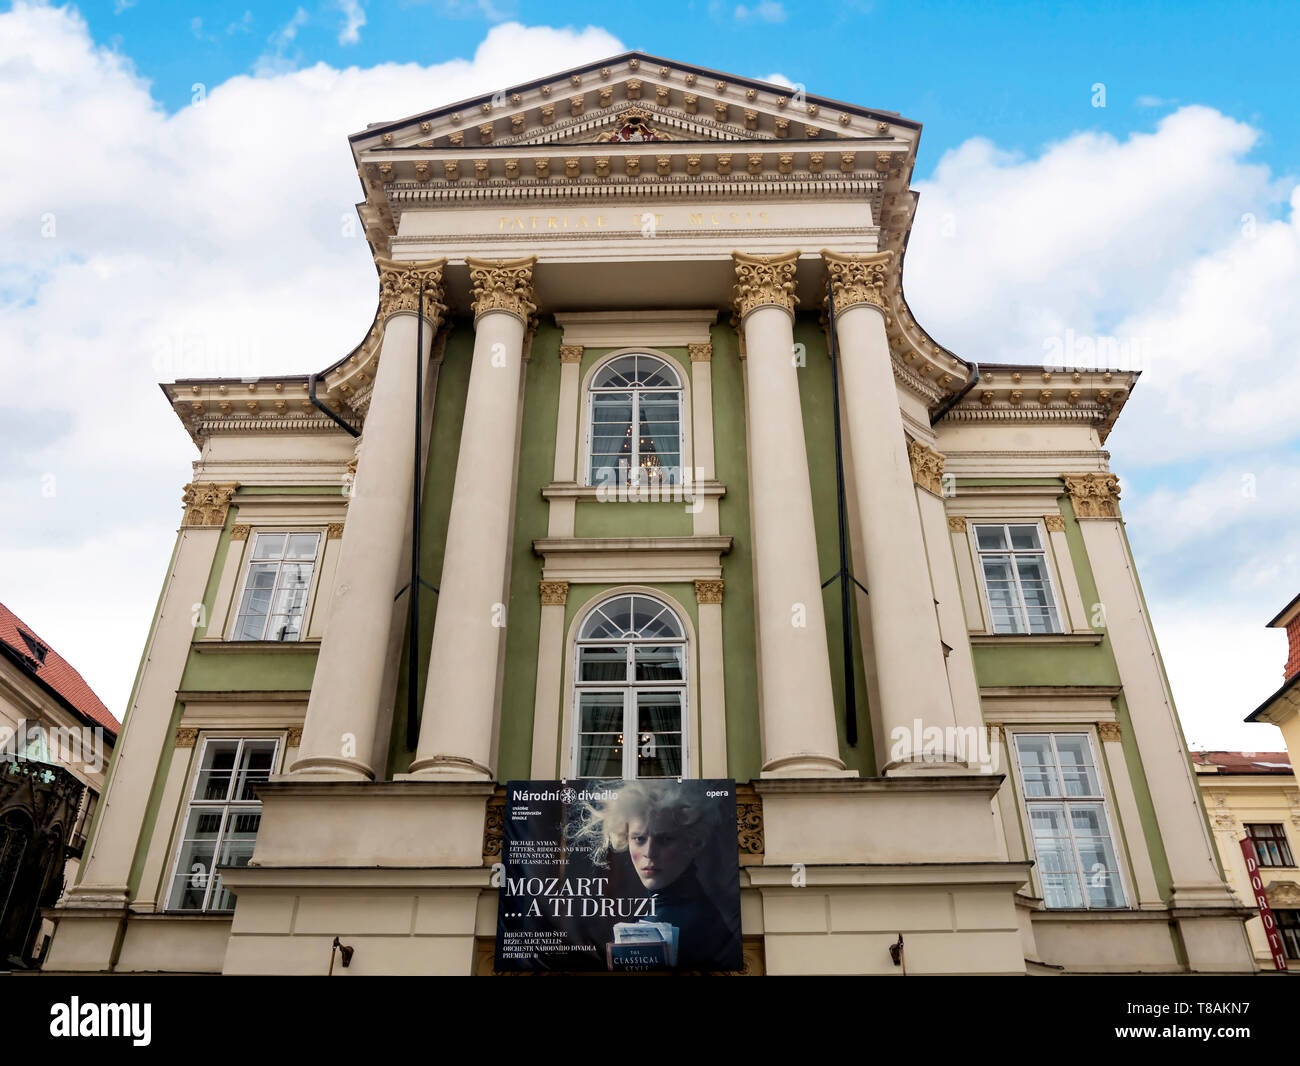 The Estate Theatre in Prague Capital of the Czech Republic, where Mozart  conducted the premiere of his opera Don Giovanni Stock Photo - Alamy